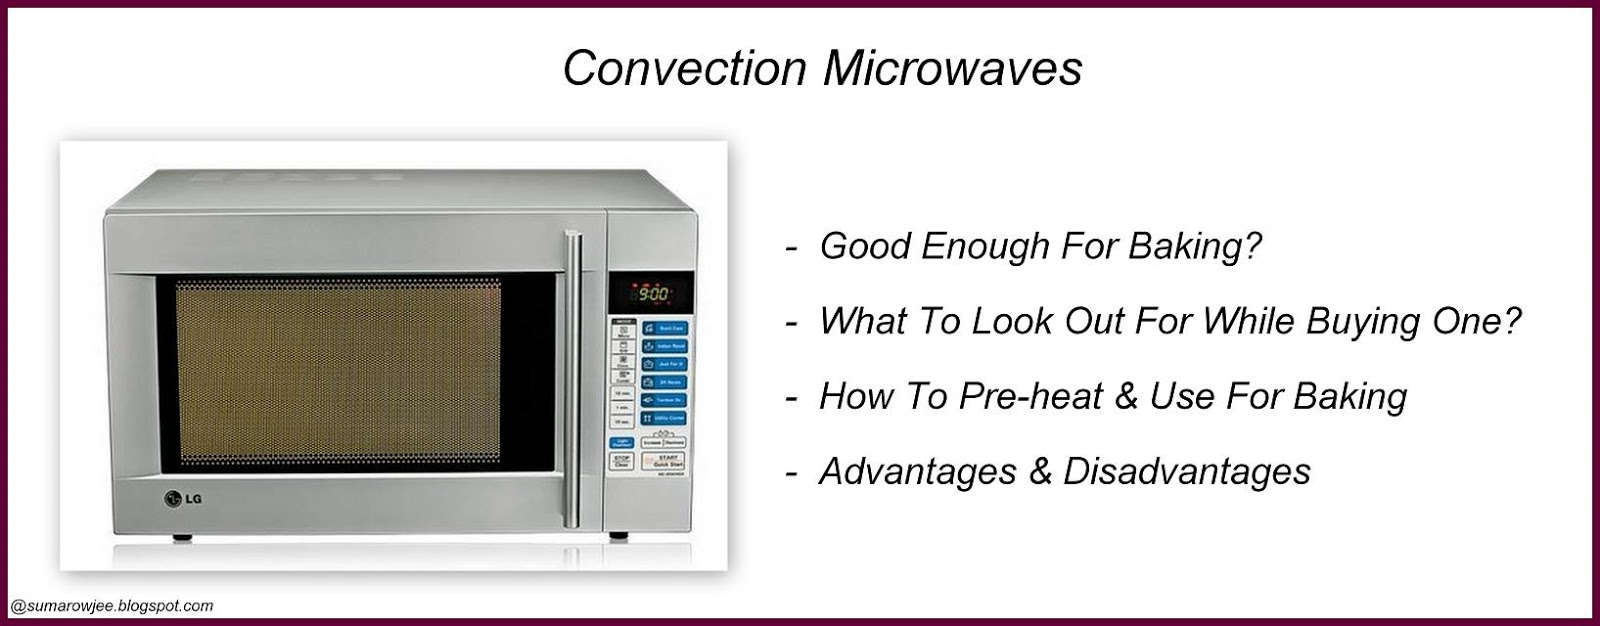 What advantages do microwave ovens have over convection ovens?